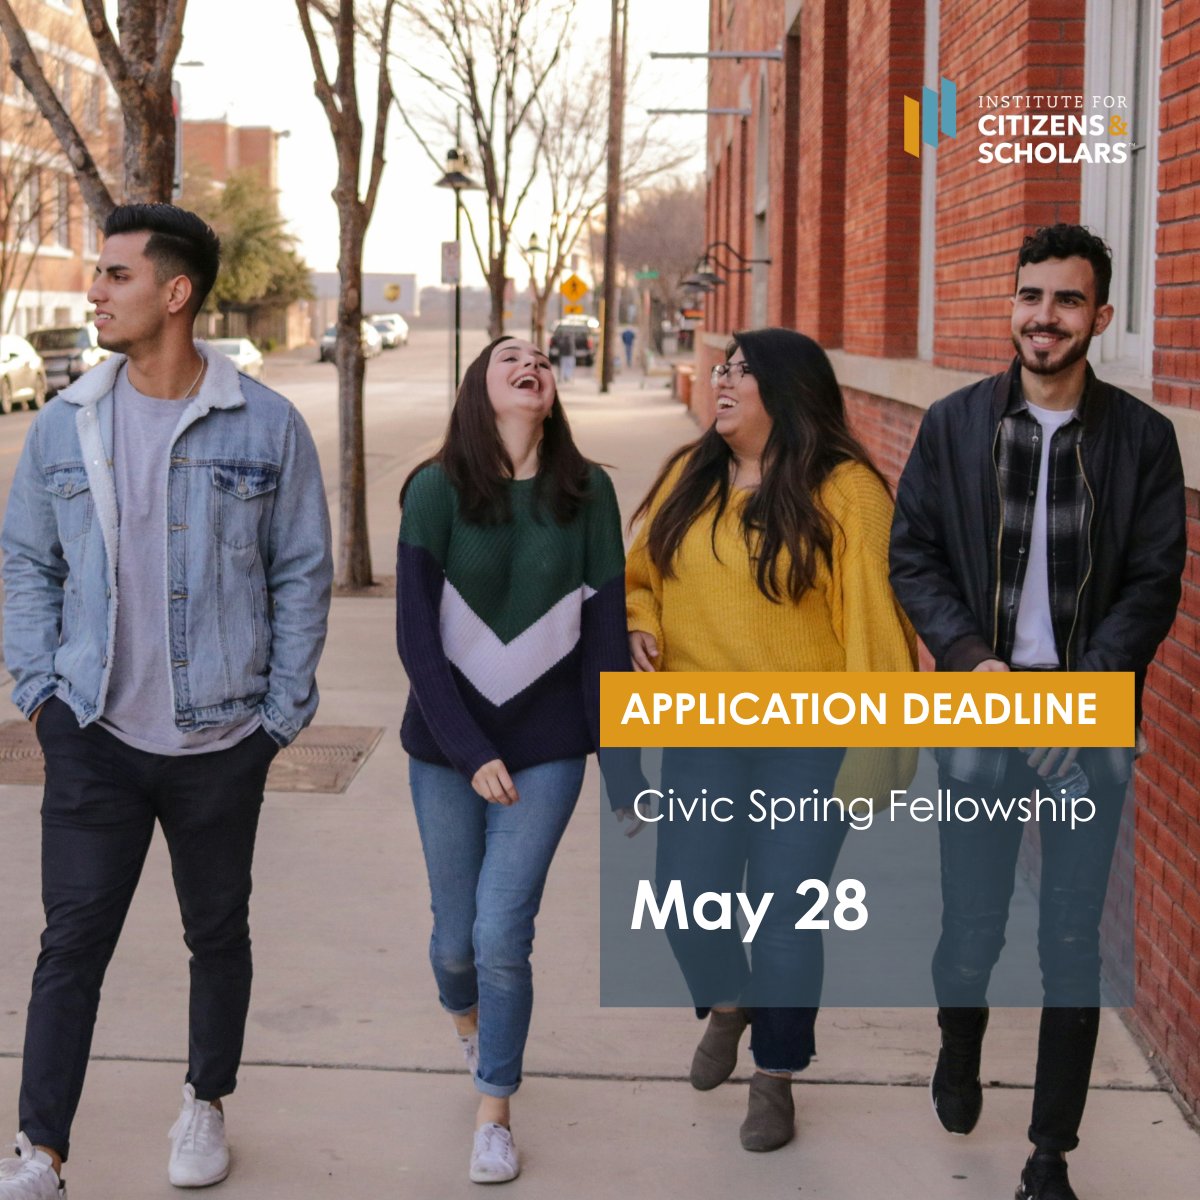 Are you a young person in the state of New Jersey passionate about voter education and civic engagement? Apply to the @ctzns_schlrs Civic Spring Fellowship opportunity by May 28!
citizensandscholars.org/fellowships/fo…